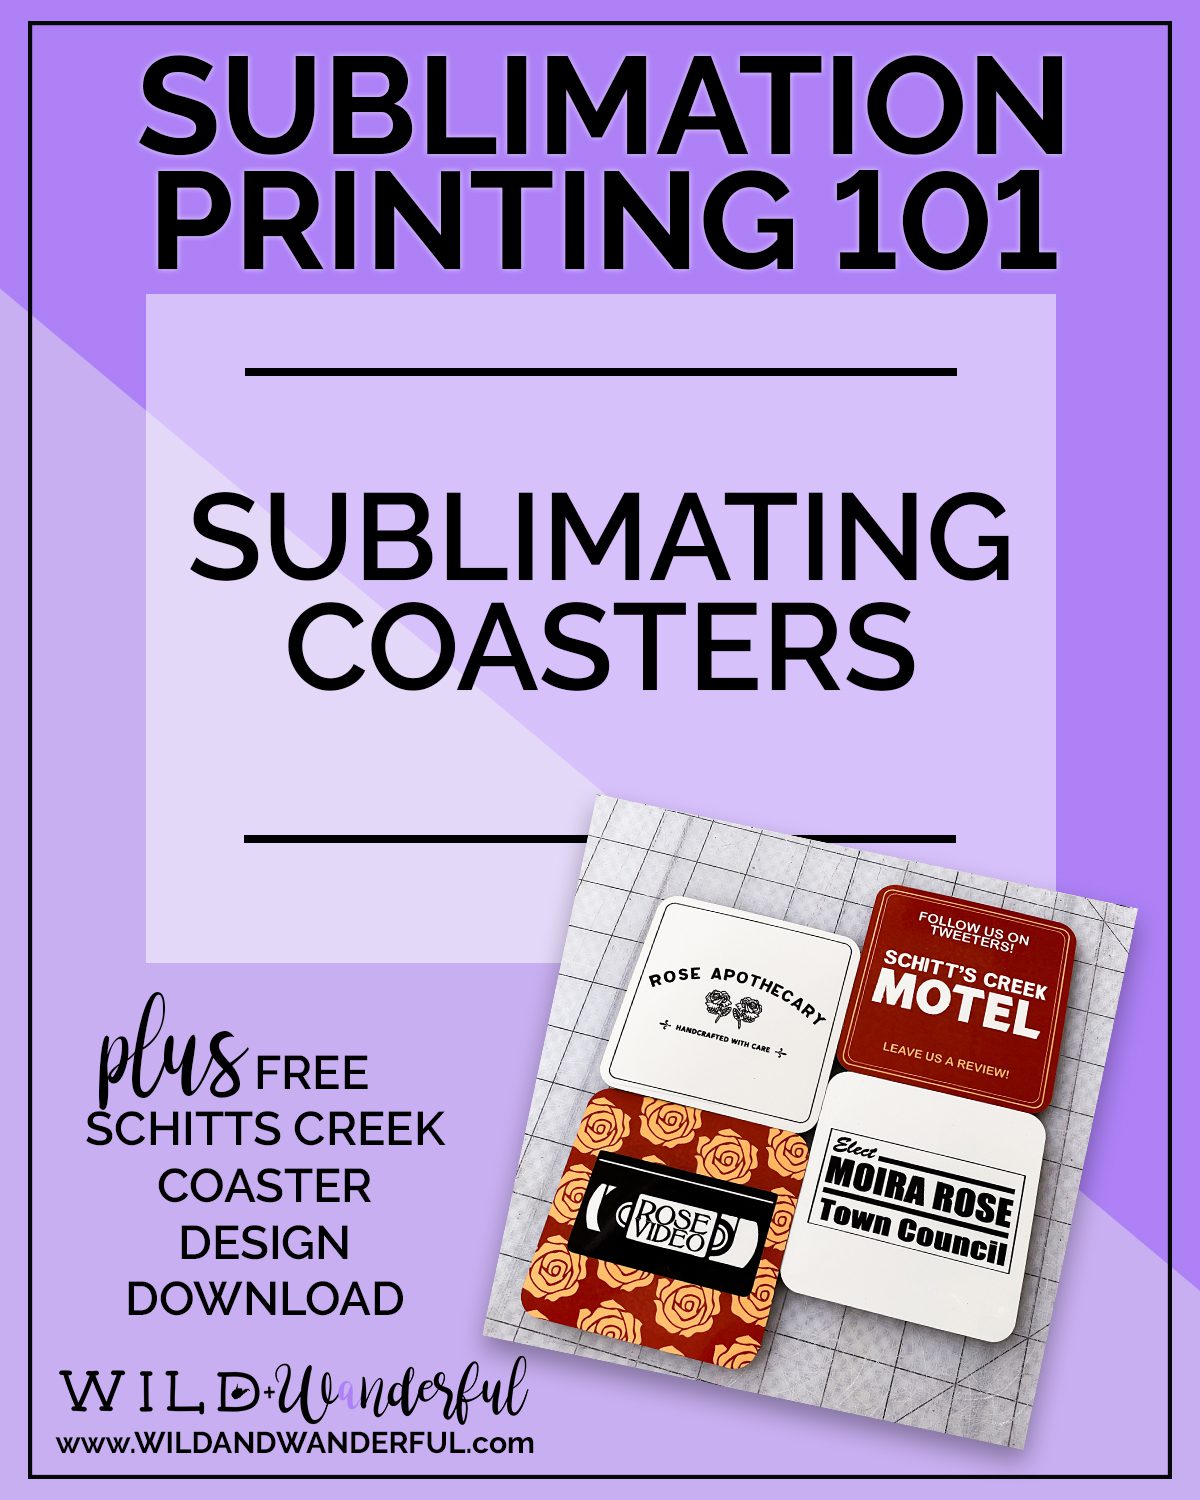 Sublimation Printing 101, Sublimating Coasters